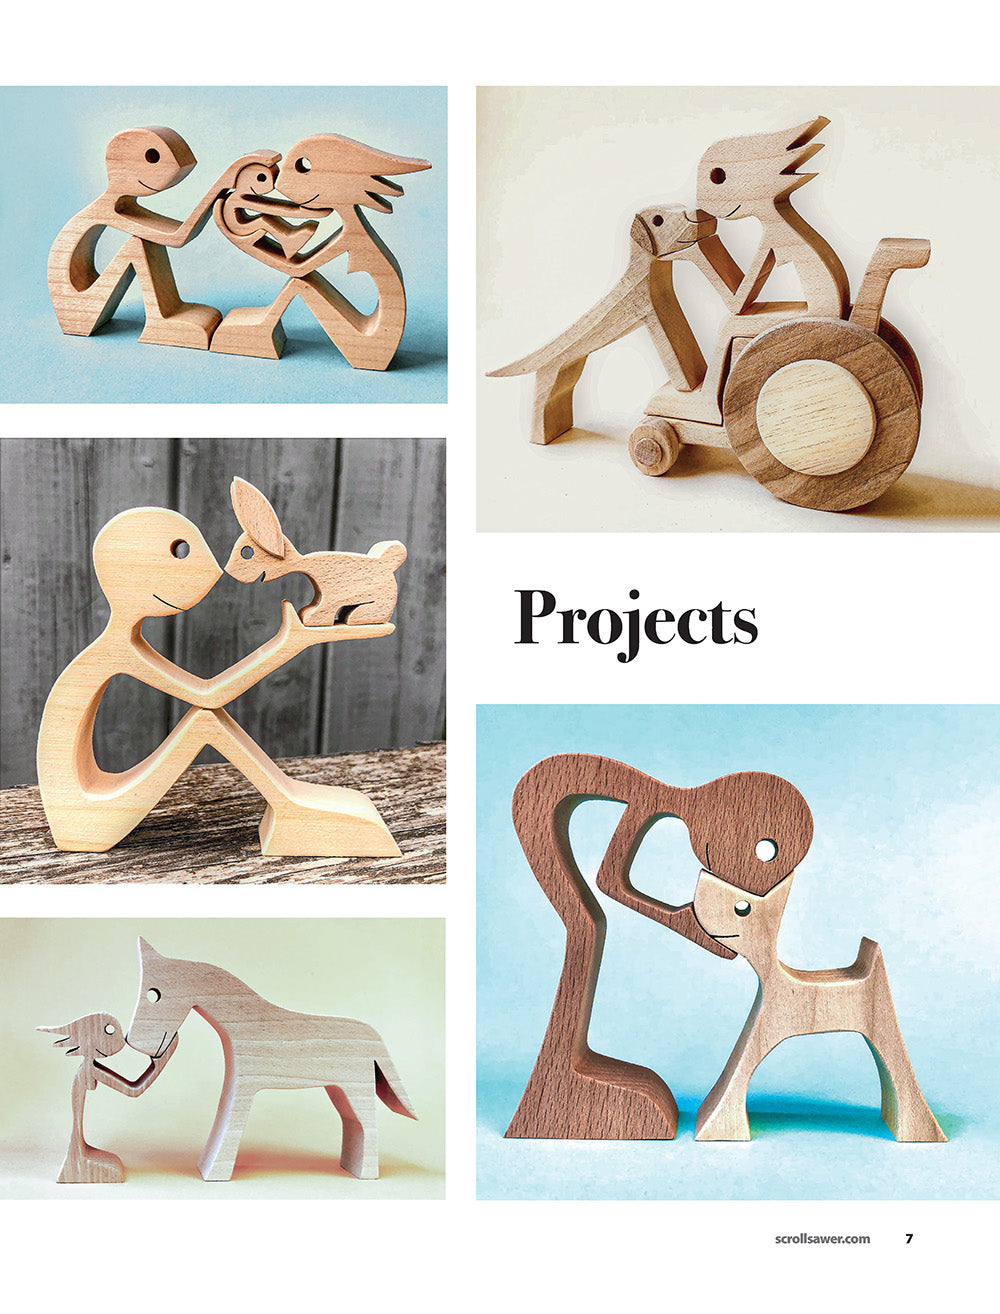 Making Wooden People & Pets With Personality